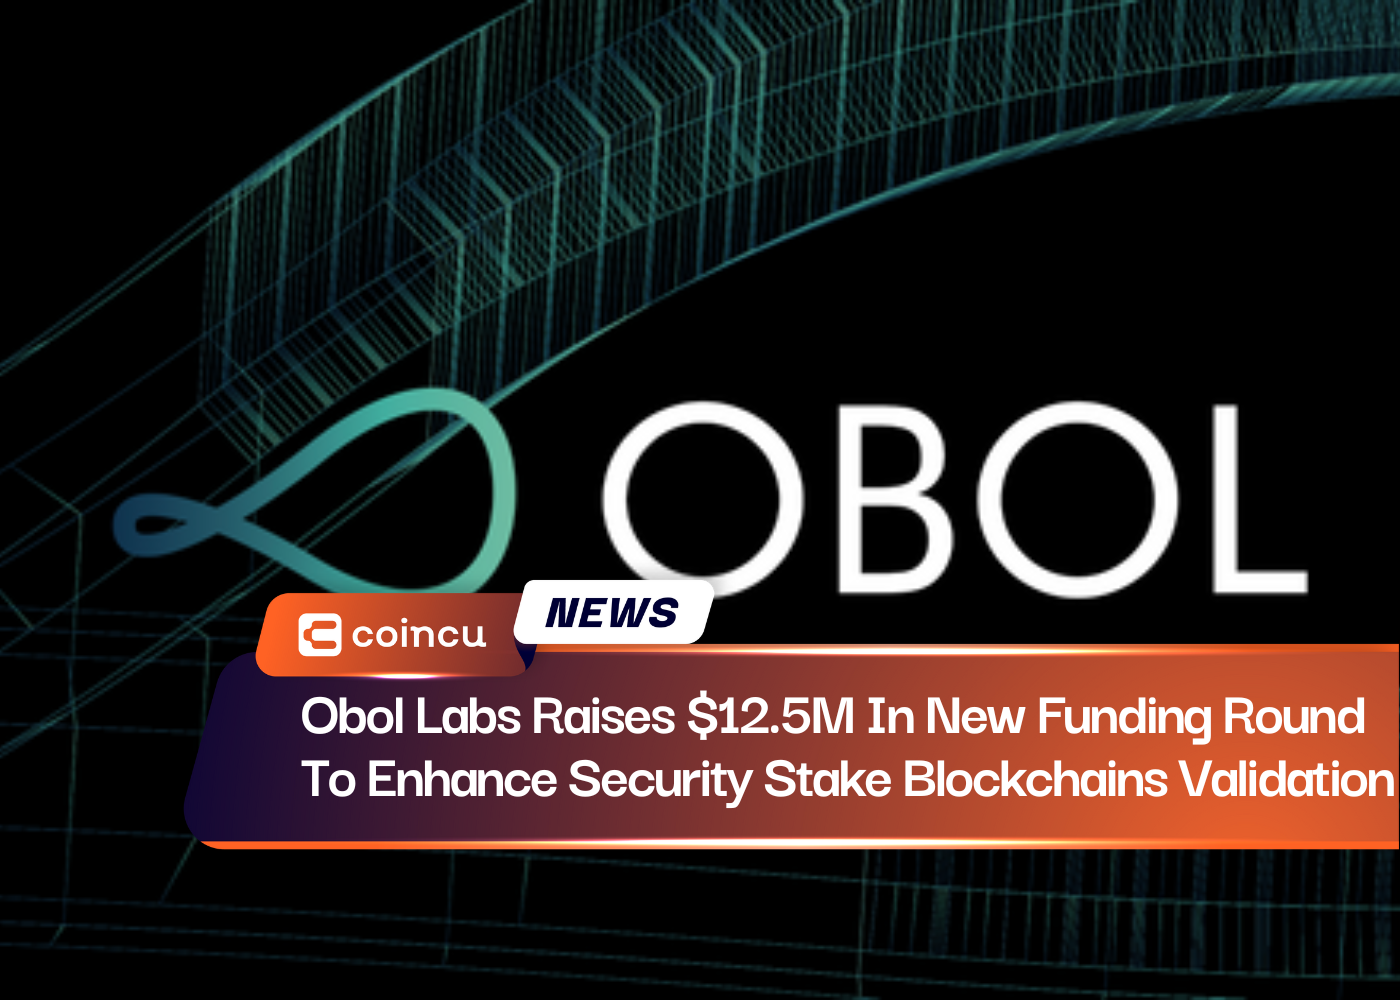 Obol Labs Raises $12.5M In New Funding Round To Enhance Security Stake Blockchains Validation